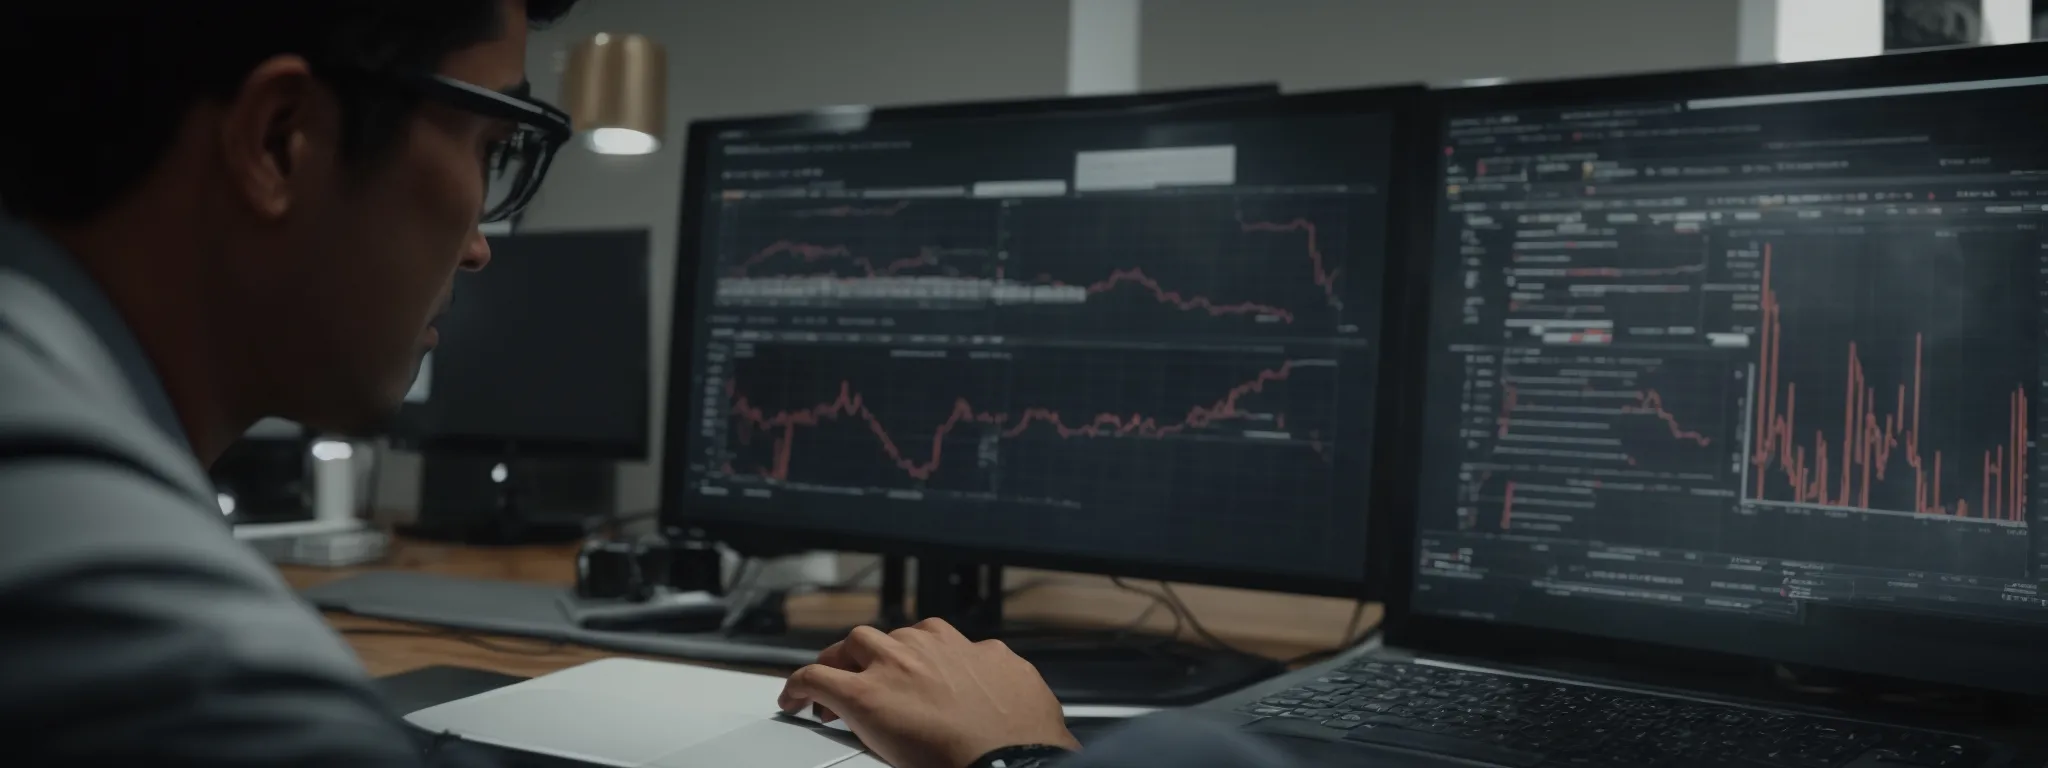 a marketer analyzing graphs and charts on a computer screen to assess the effectiveness of seo strategies.